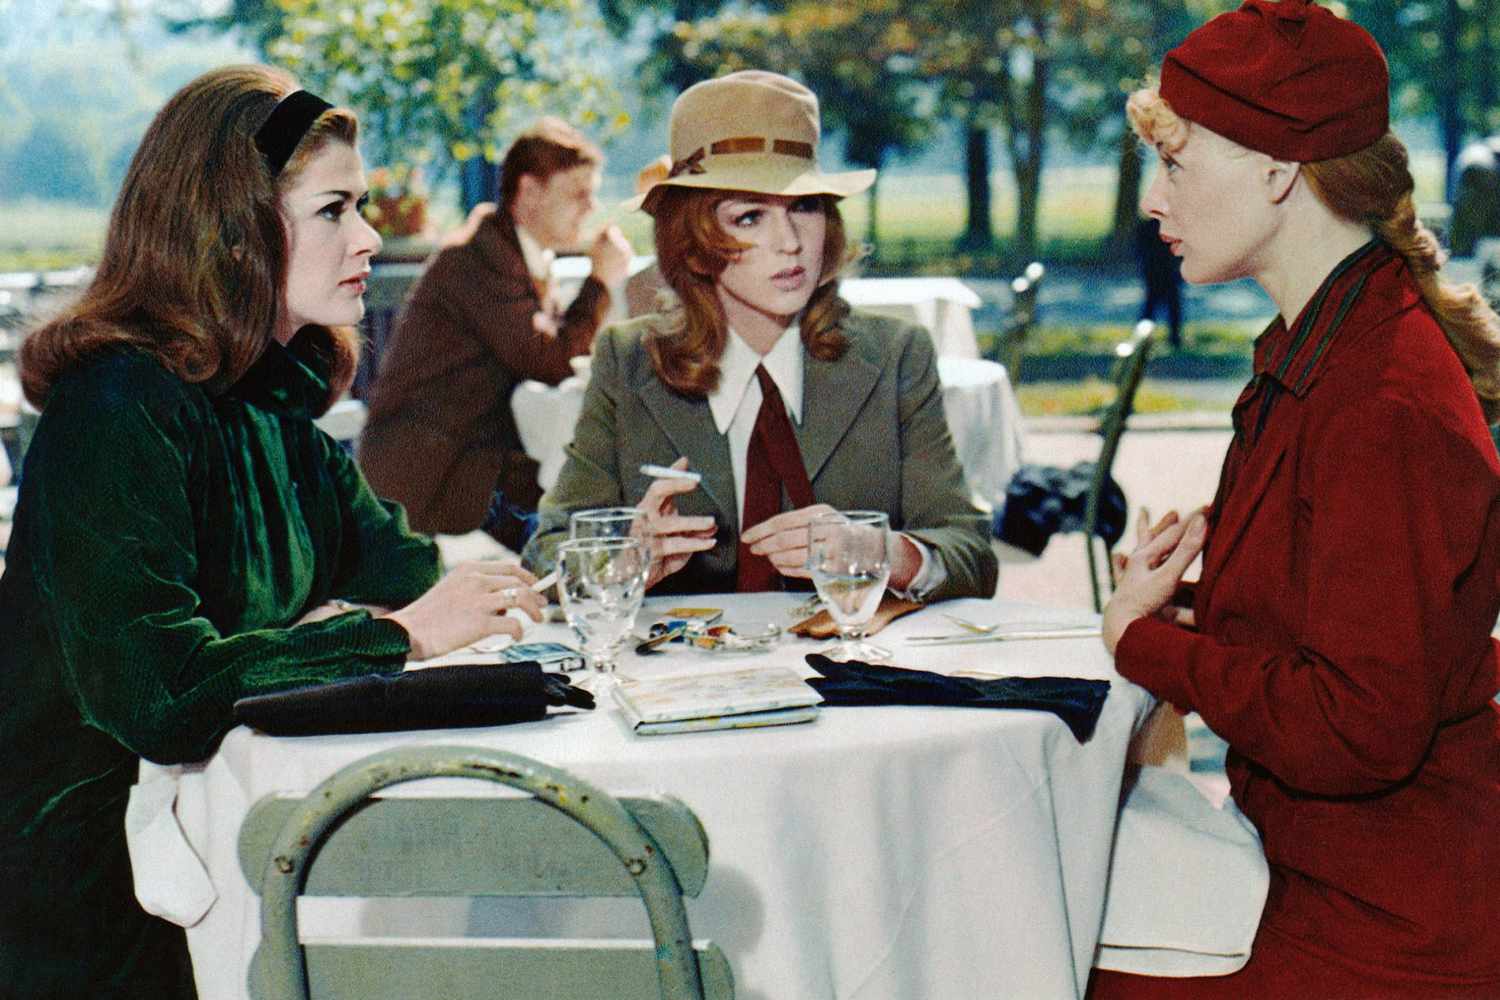 THE GROUP, from left: Jessica Walter, Joanna Pettet, Shirley Knight, 1966